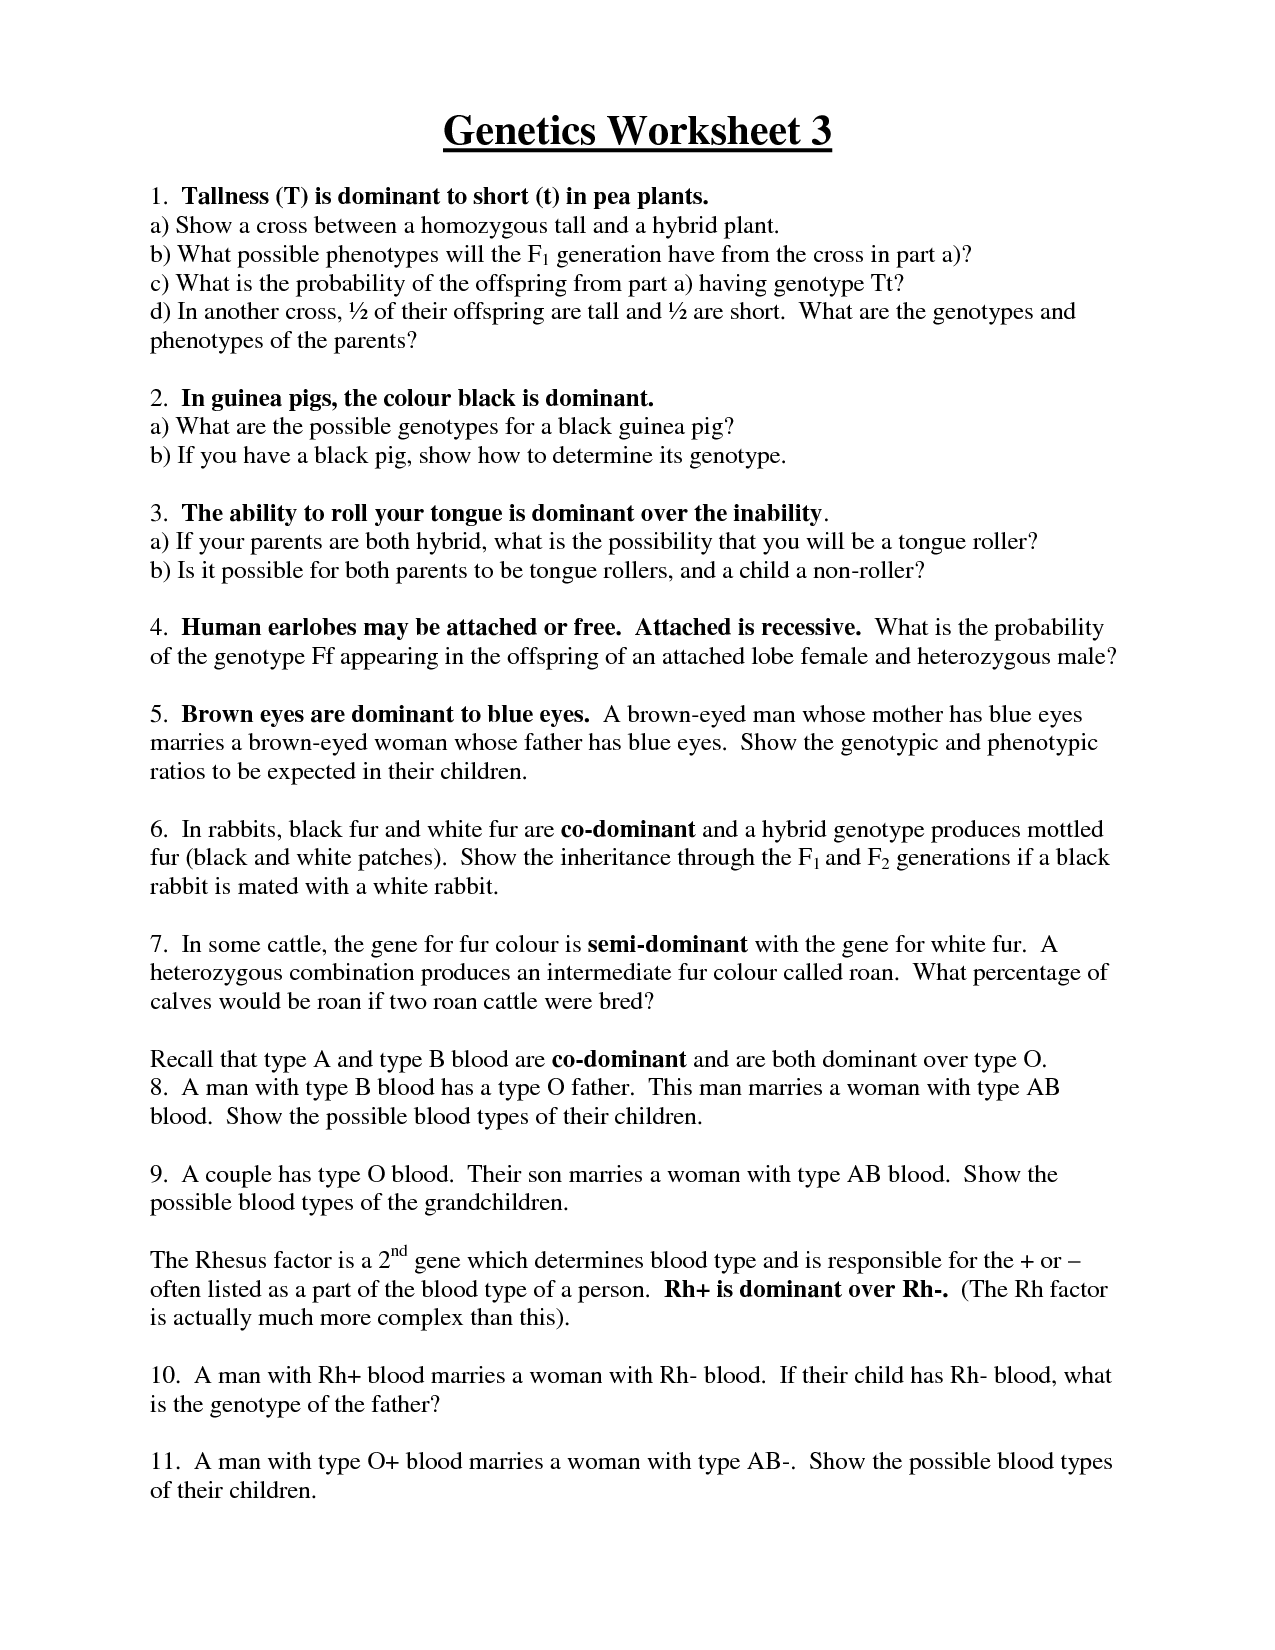 16-best-images-of-blood-type-worksheet-answer-key-codominance-worksheet-blood-types-blood